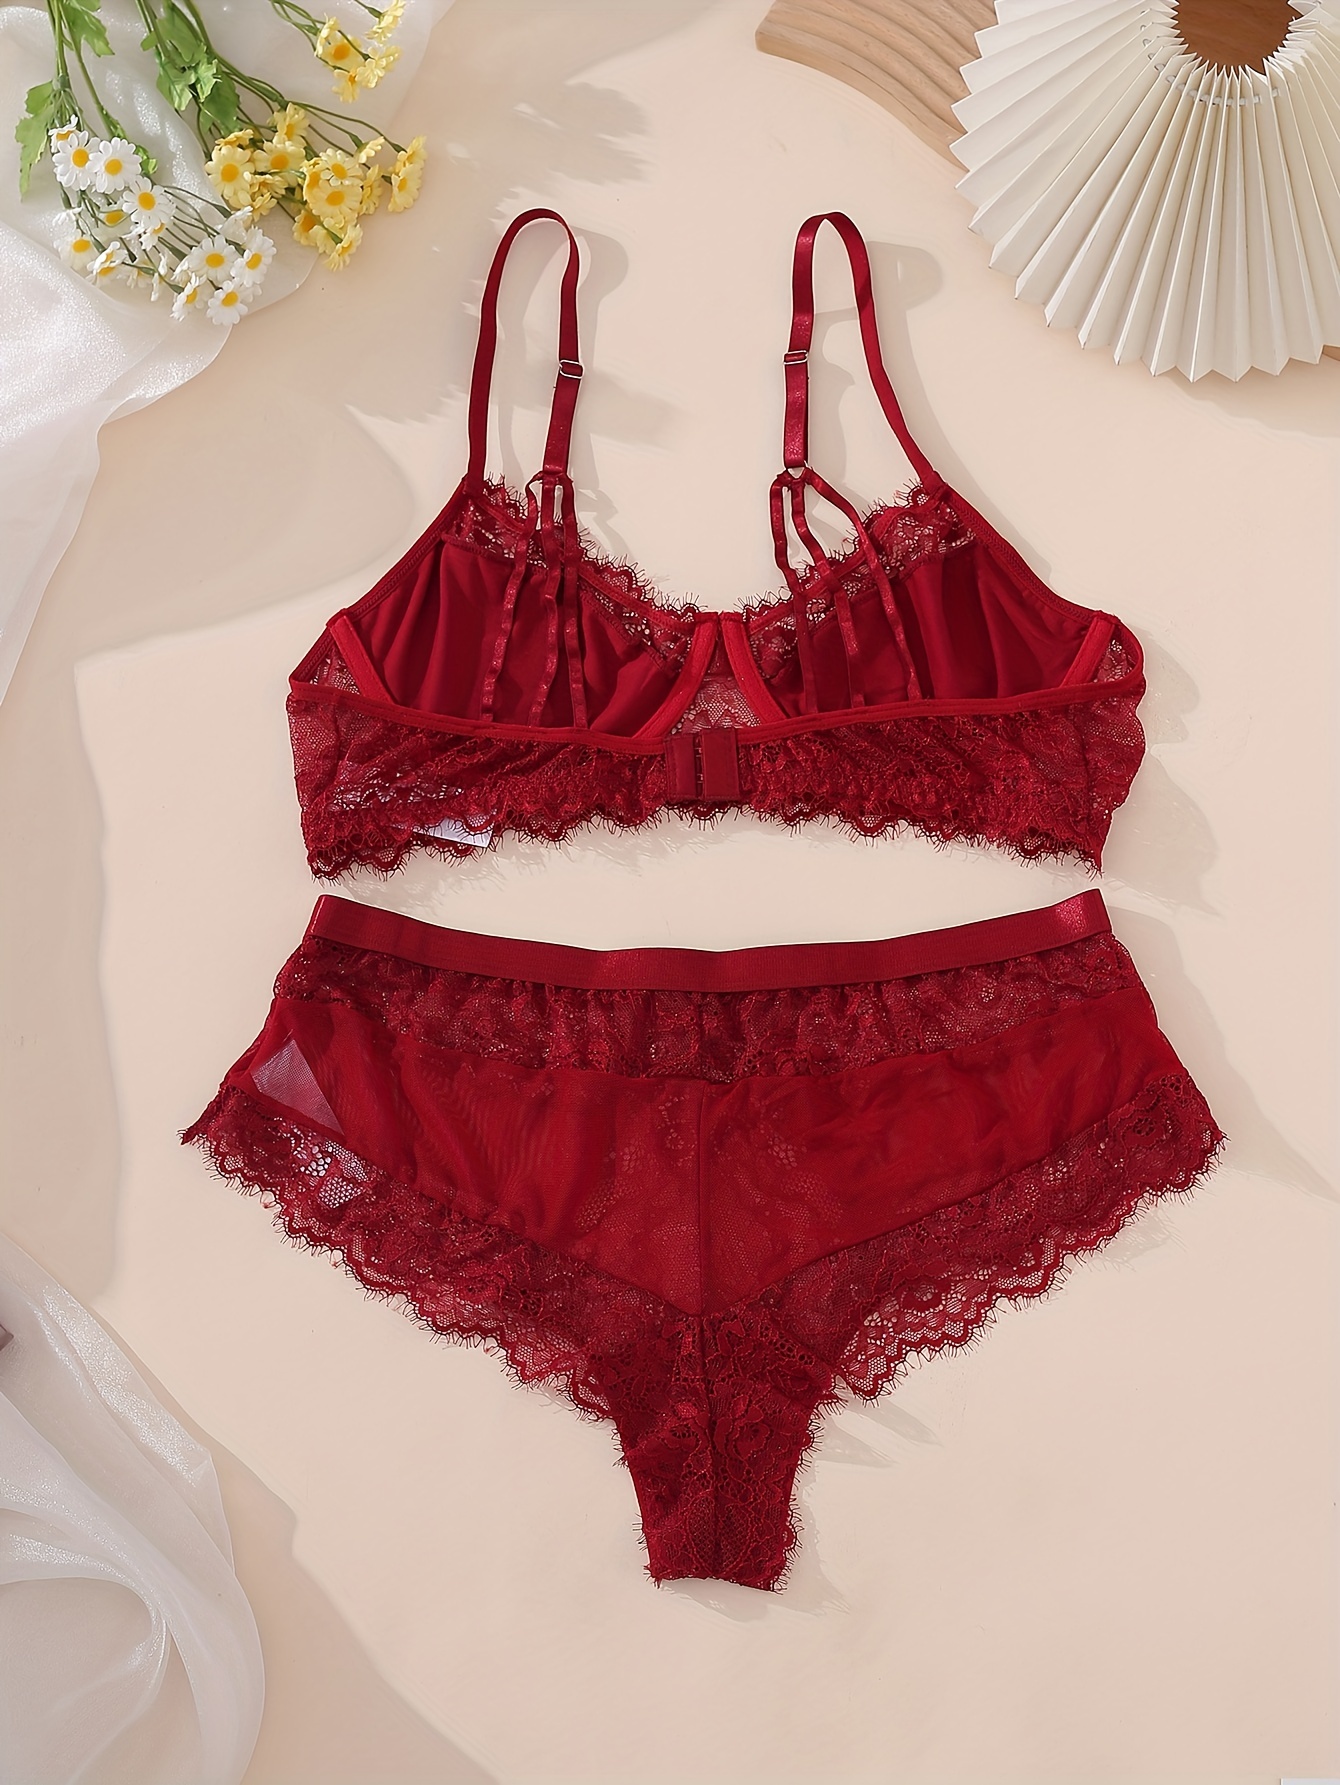 Eyelash Lace Cut Out Bralette and Knickers Lingerie Set